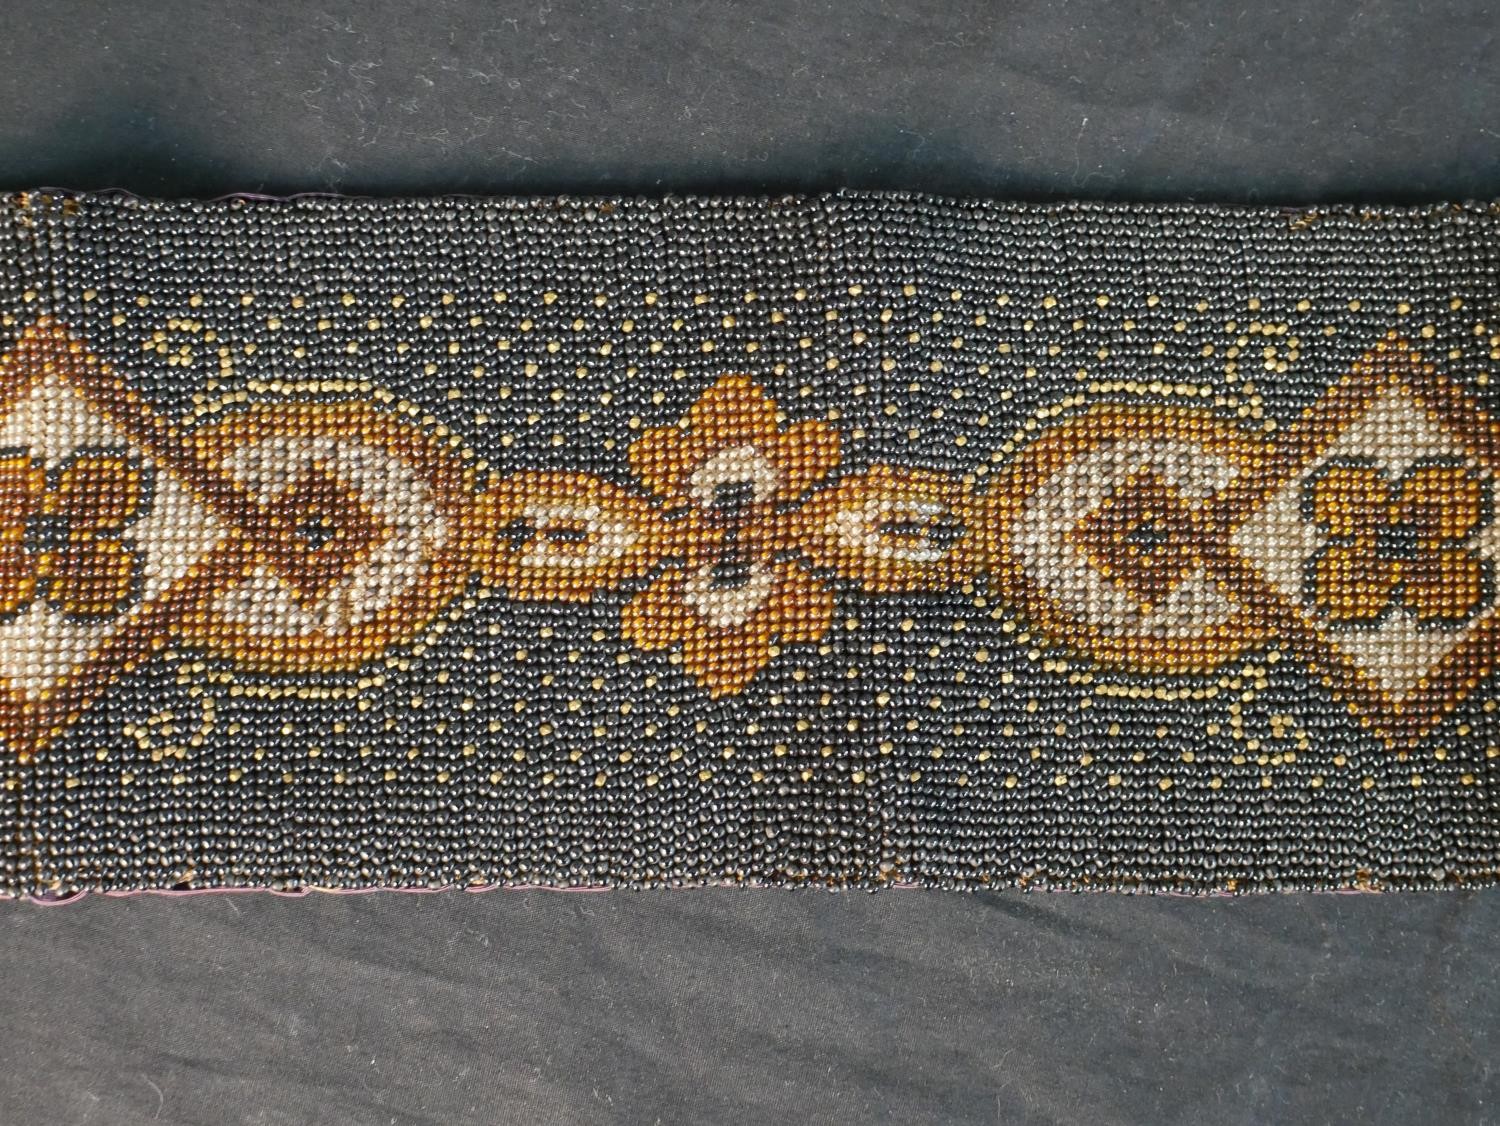 Two 19th century beadwork panels with floral and foliate design along with a gilt metal expandable - Image 3 of 6